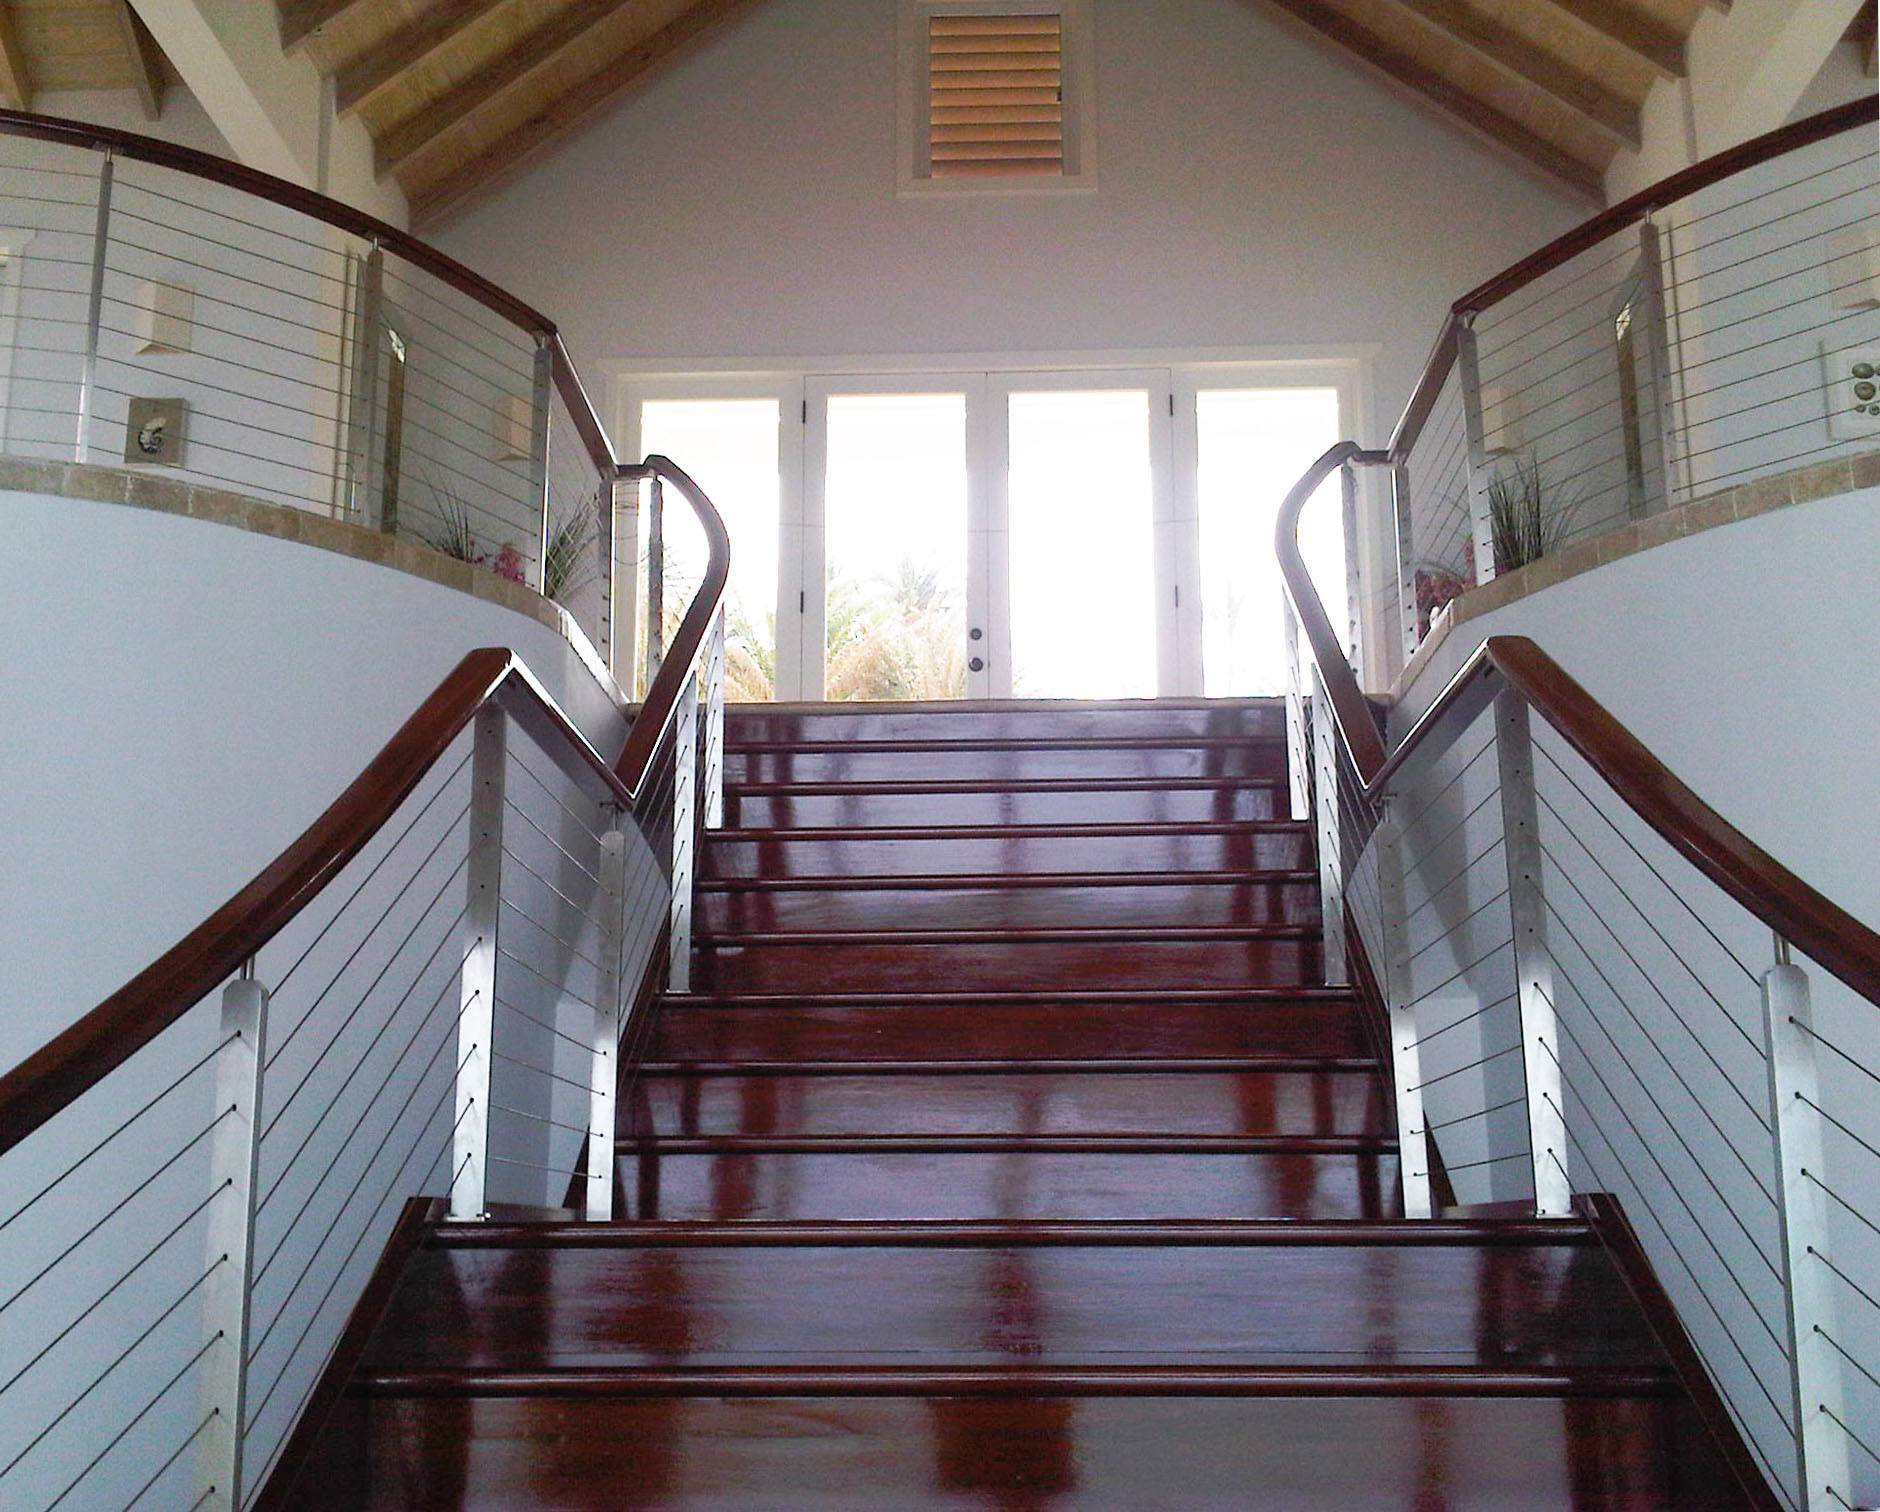 Located in Antigua Keuka Studios created this custom stainless steel railing on this grand interior staircase